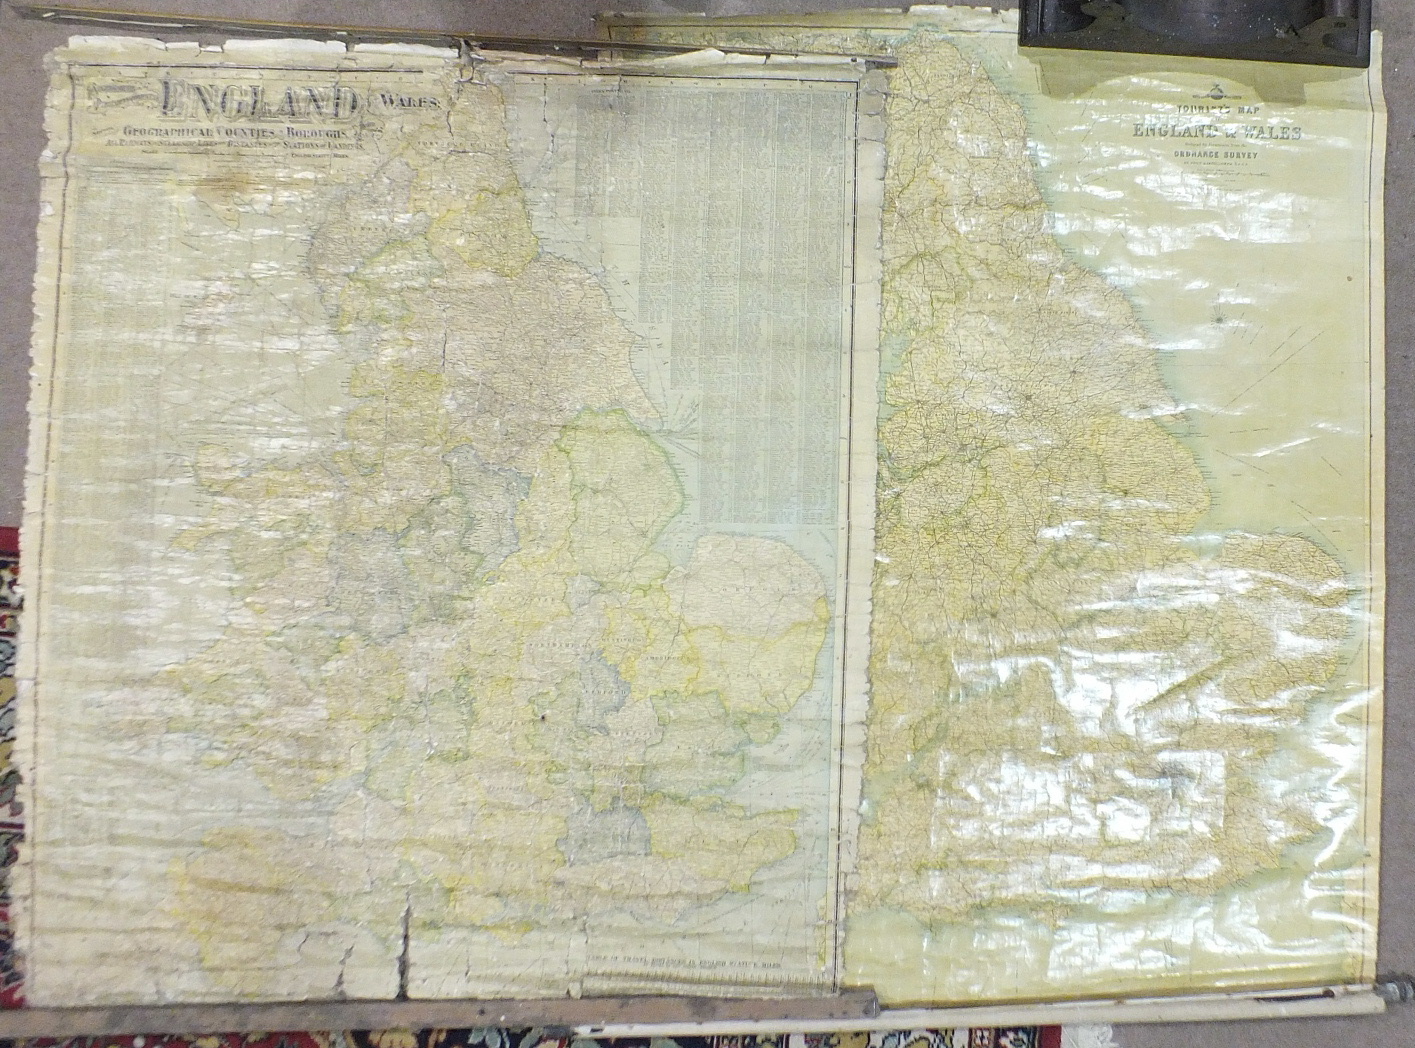 Bacon's Excelsior Map of Devon & Cornwall, showing Railways, Roads and Elevations, linen-backed, - Image 2 of 2